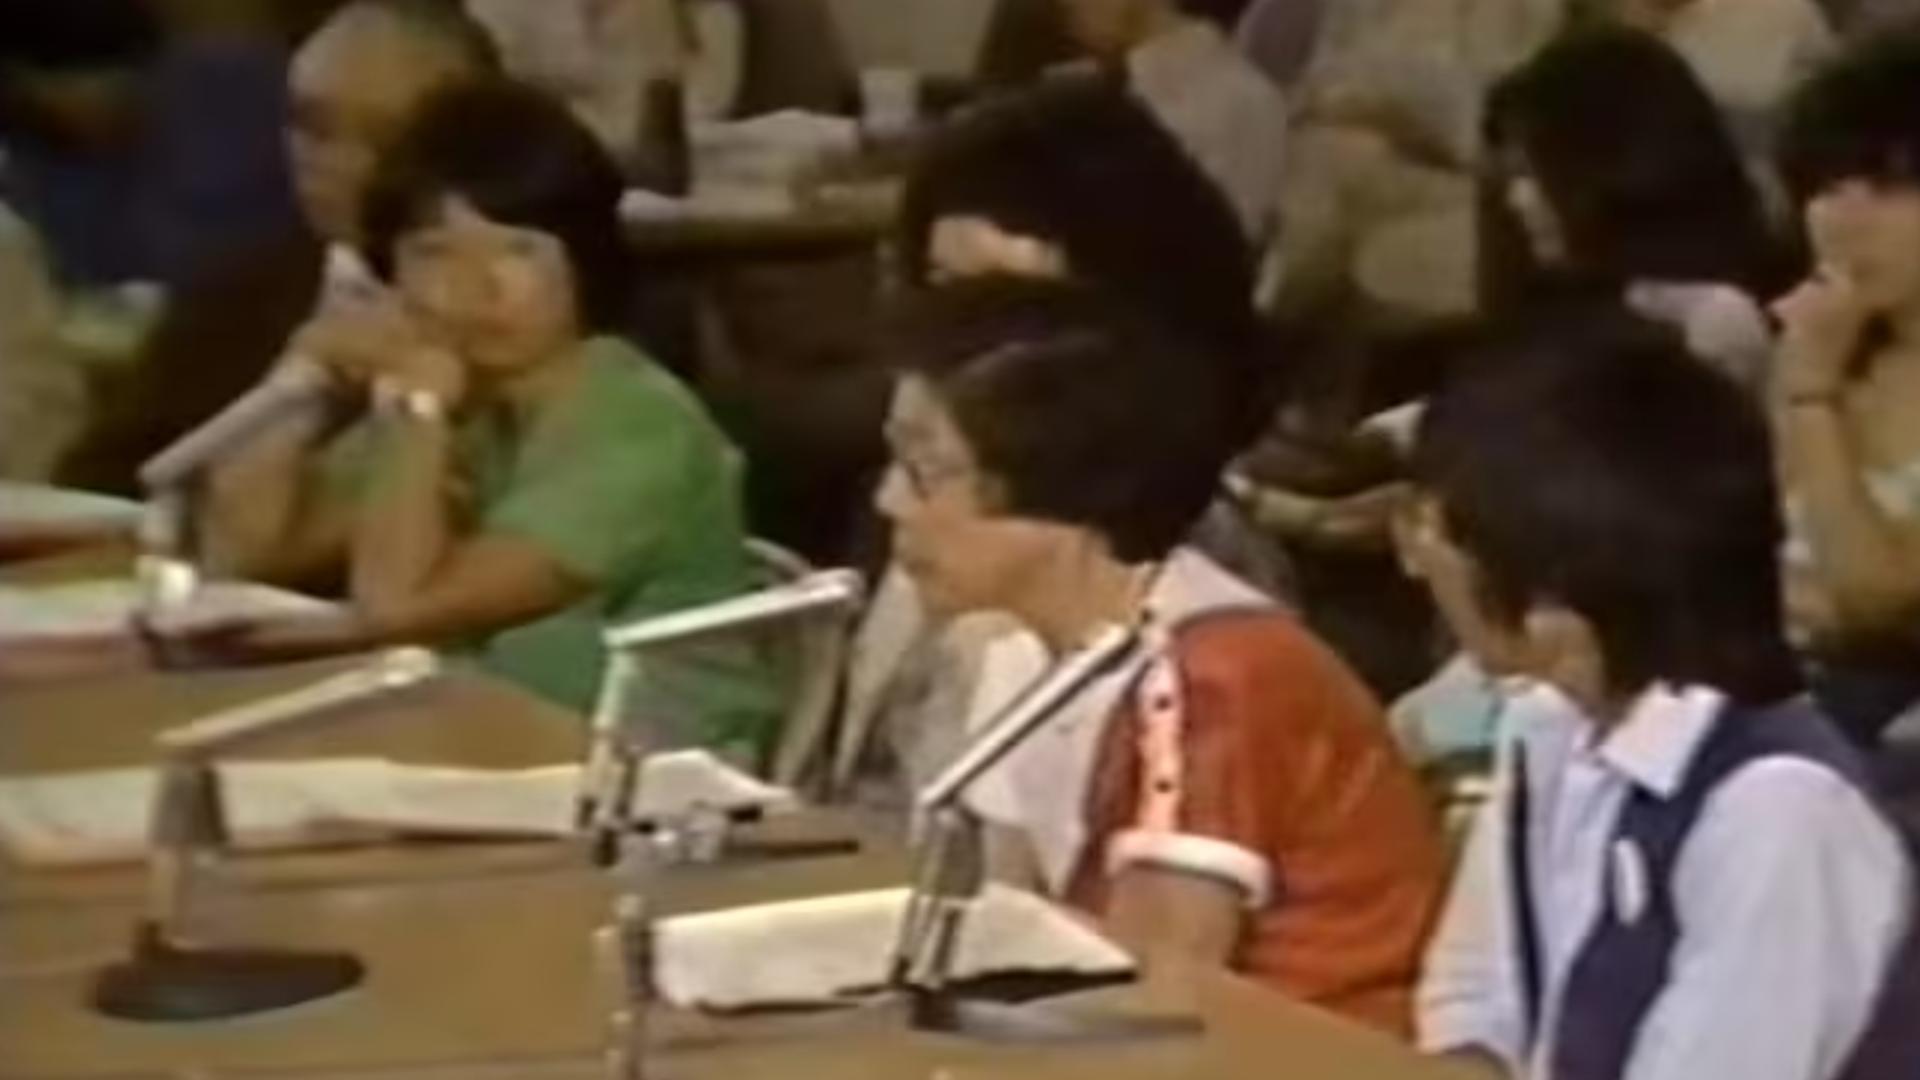 SPEAK OUT FOR JUSTICE: AUGUST 5, 1981 - PART 2